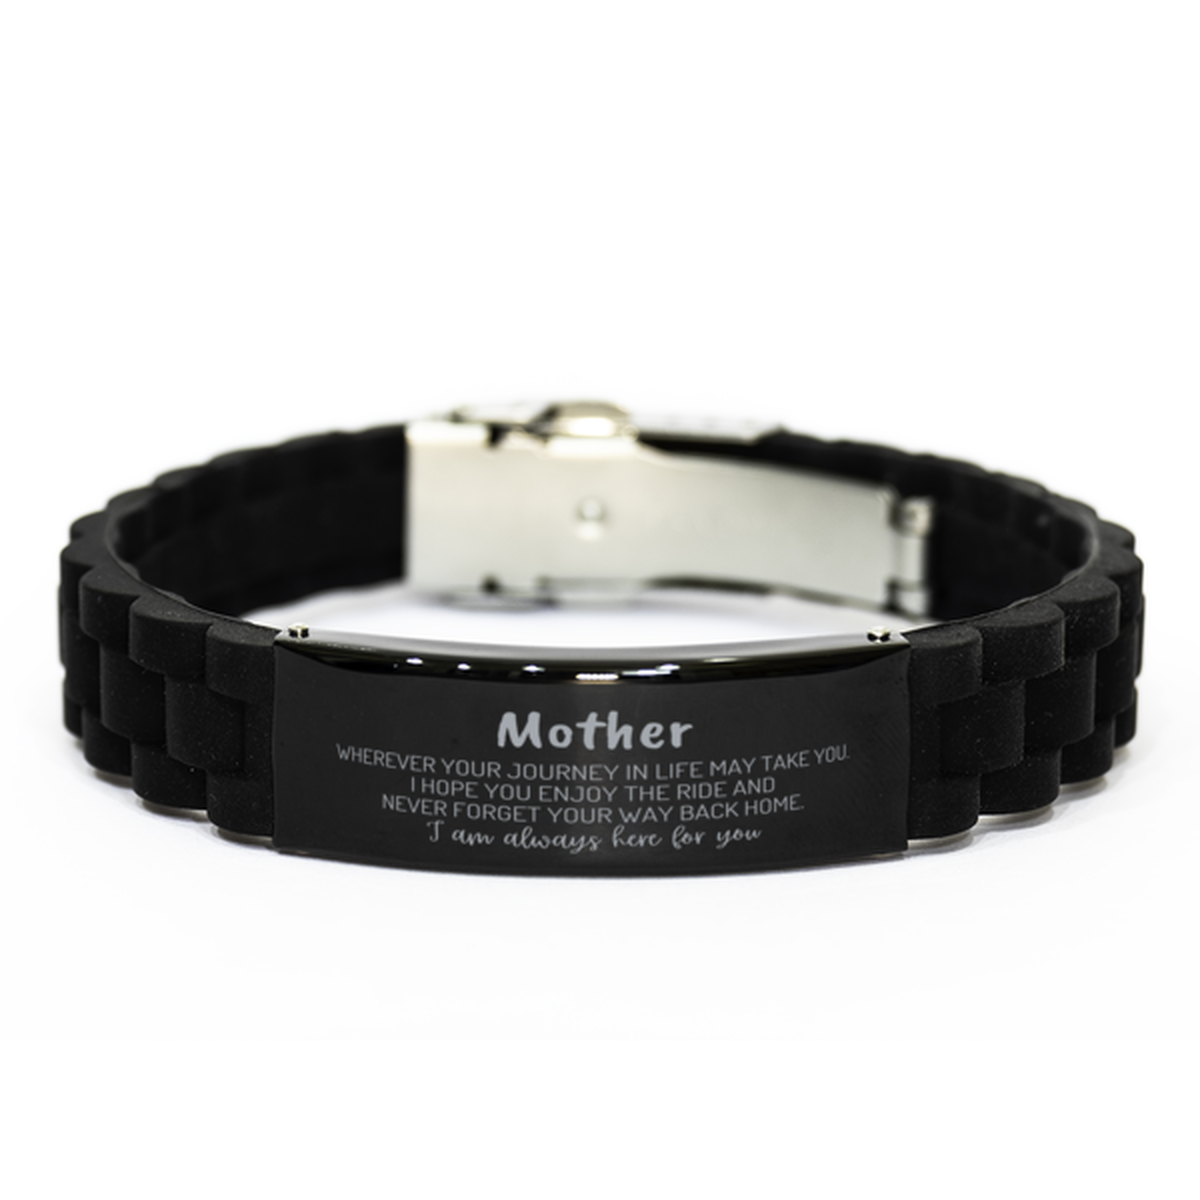 Mother wherever your journey in life may take you, I am always here for you Mother Black Glidelock Clasp Bracelet, Awesome Christmas Gifts For Mother, Mother Birthday Gifts for Men Women Family Loved One